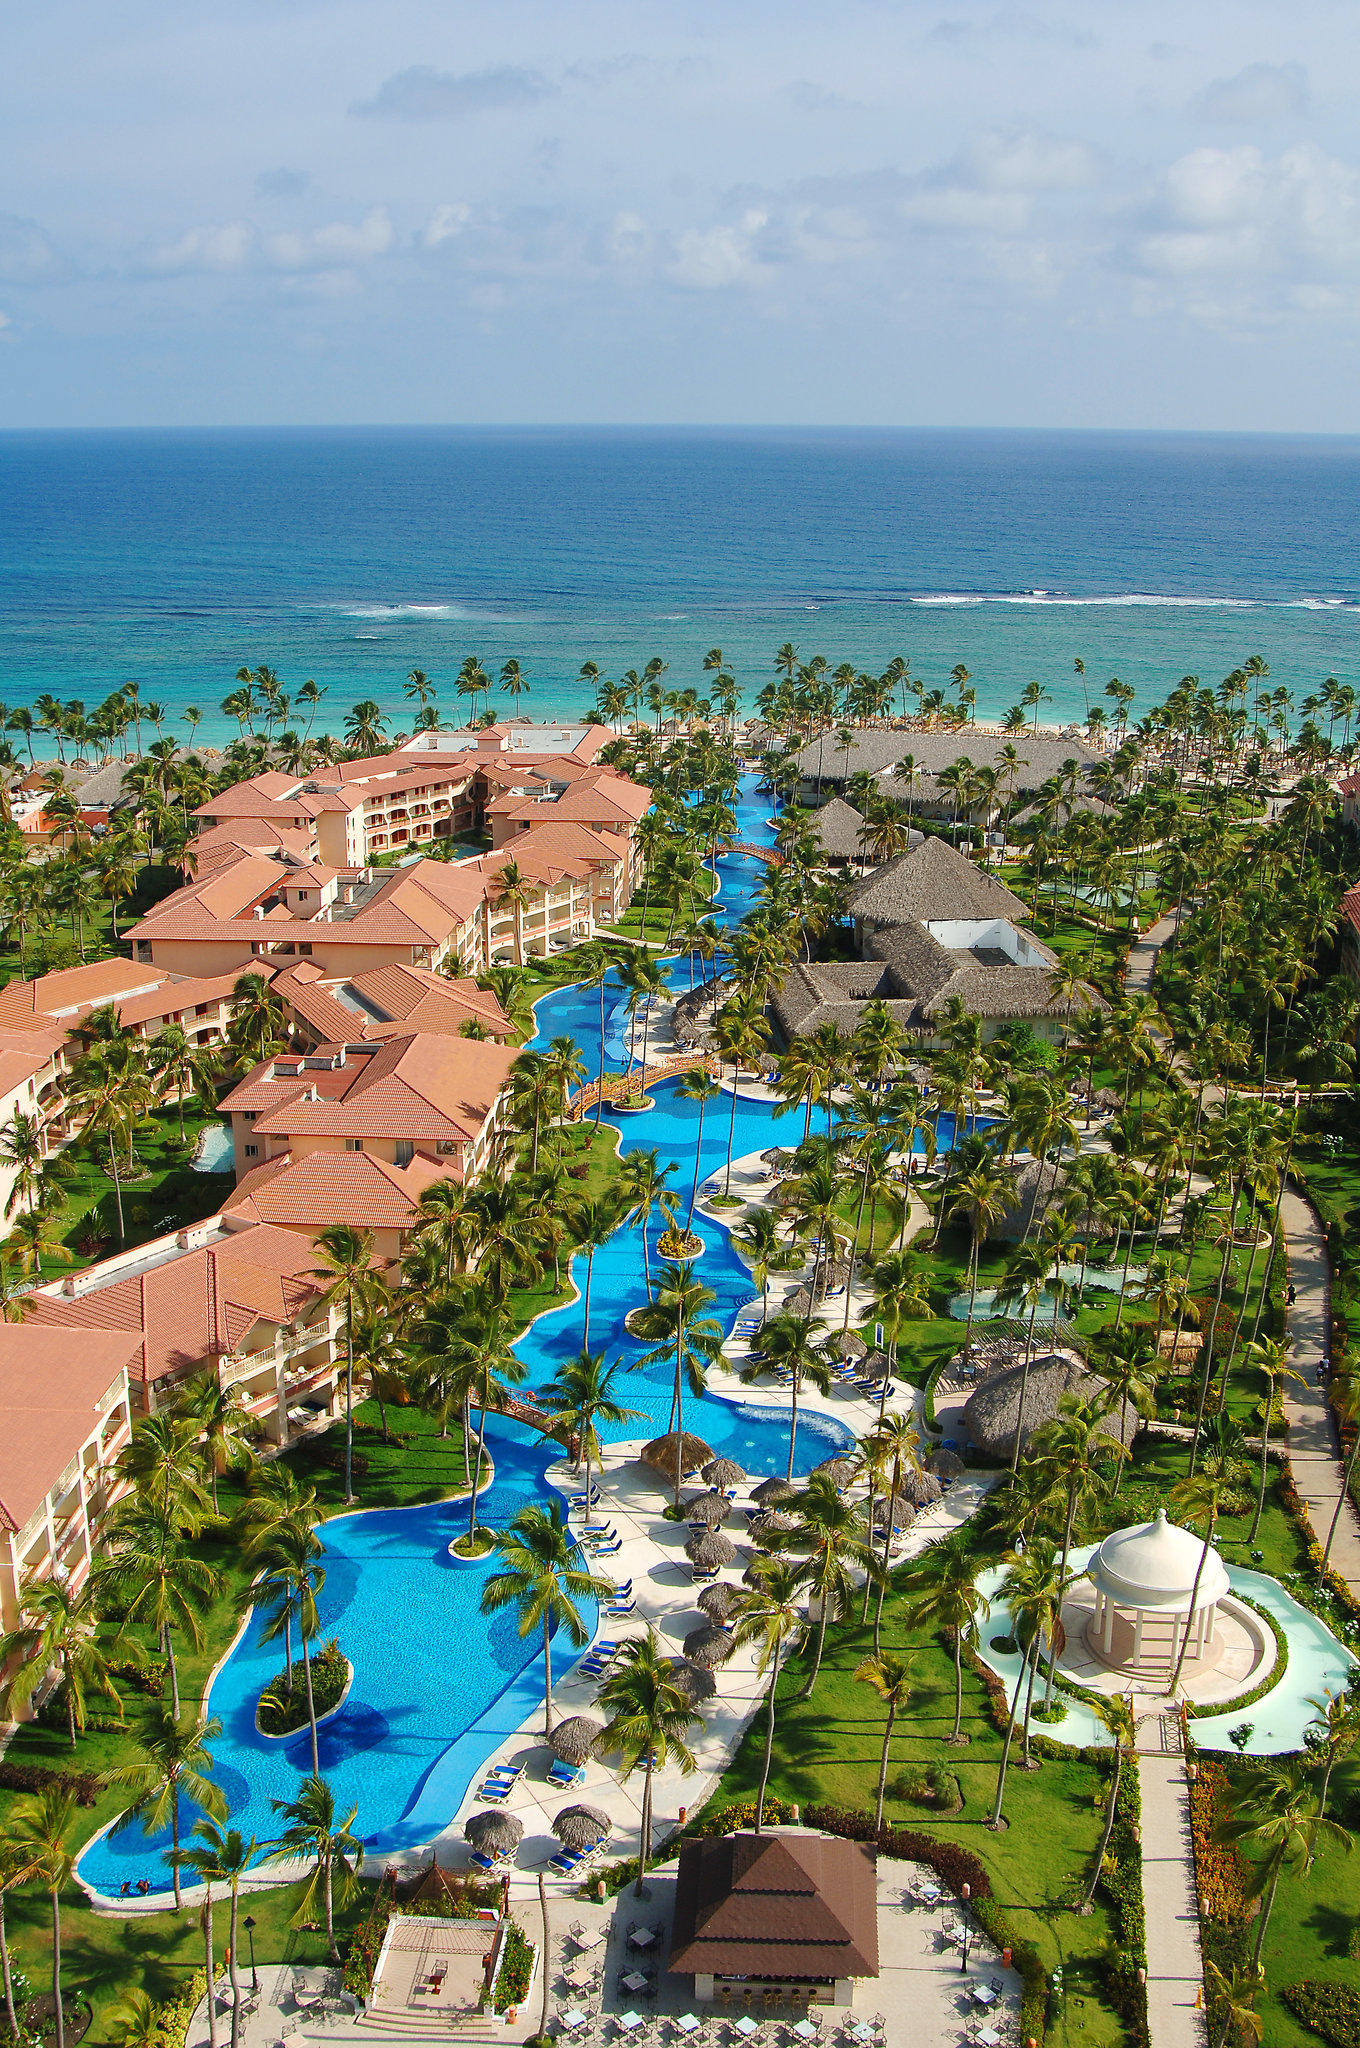 Hotel Majestic Colonial Punta Cana Cheap Vacations Packages | Red Tag